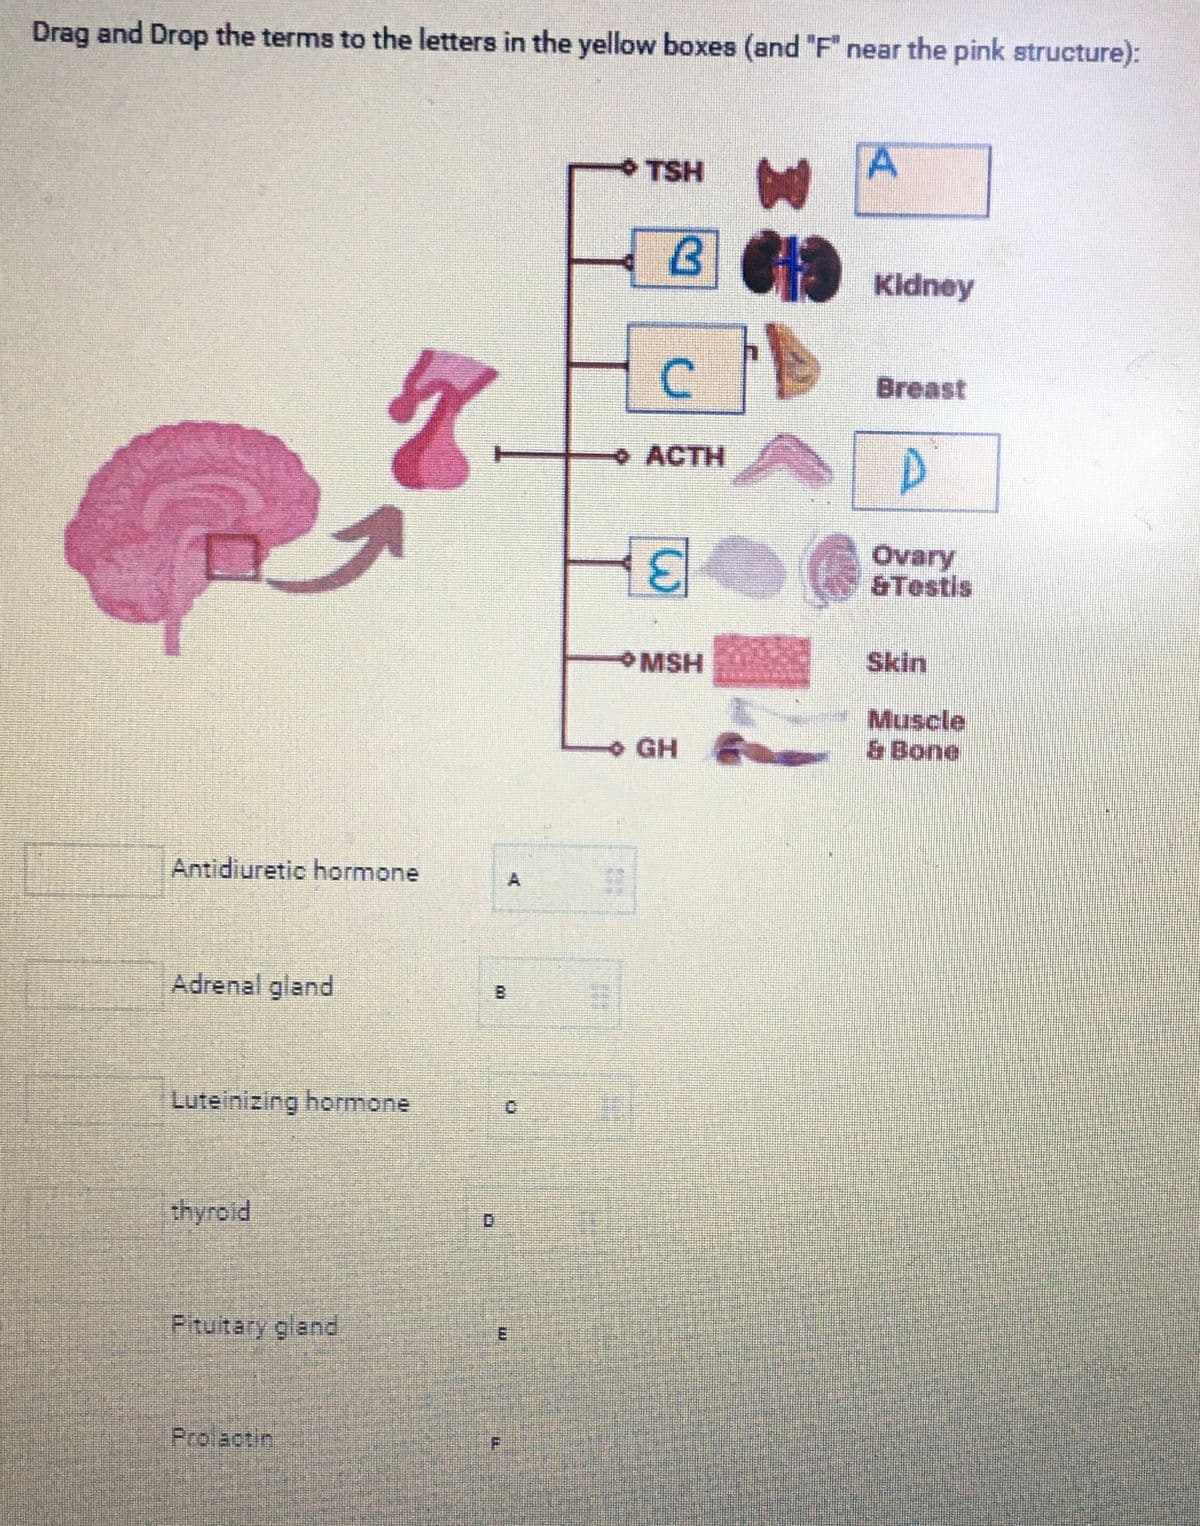 Drag and Drop the terms to the letters in the yellow boxes (and "F" near the pink structure):
Antidiuretic hormone
Adrenal gland
Luteinizing hormone
thyroid
Fituitary gland
Prolactin
w
000
XXX
E
TSH
2
G
ACTH
E
*MSH
GH
bo
CIS
D
20
A
Kidney
Breast
N D
Ovary
& Testis
Skin
Muscle
& Bone